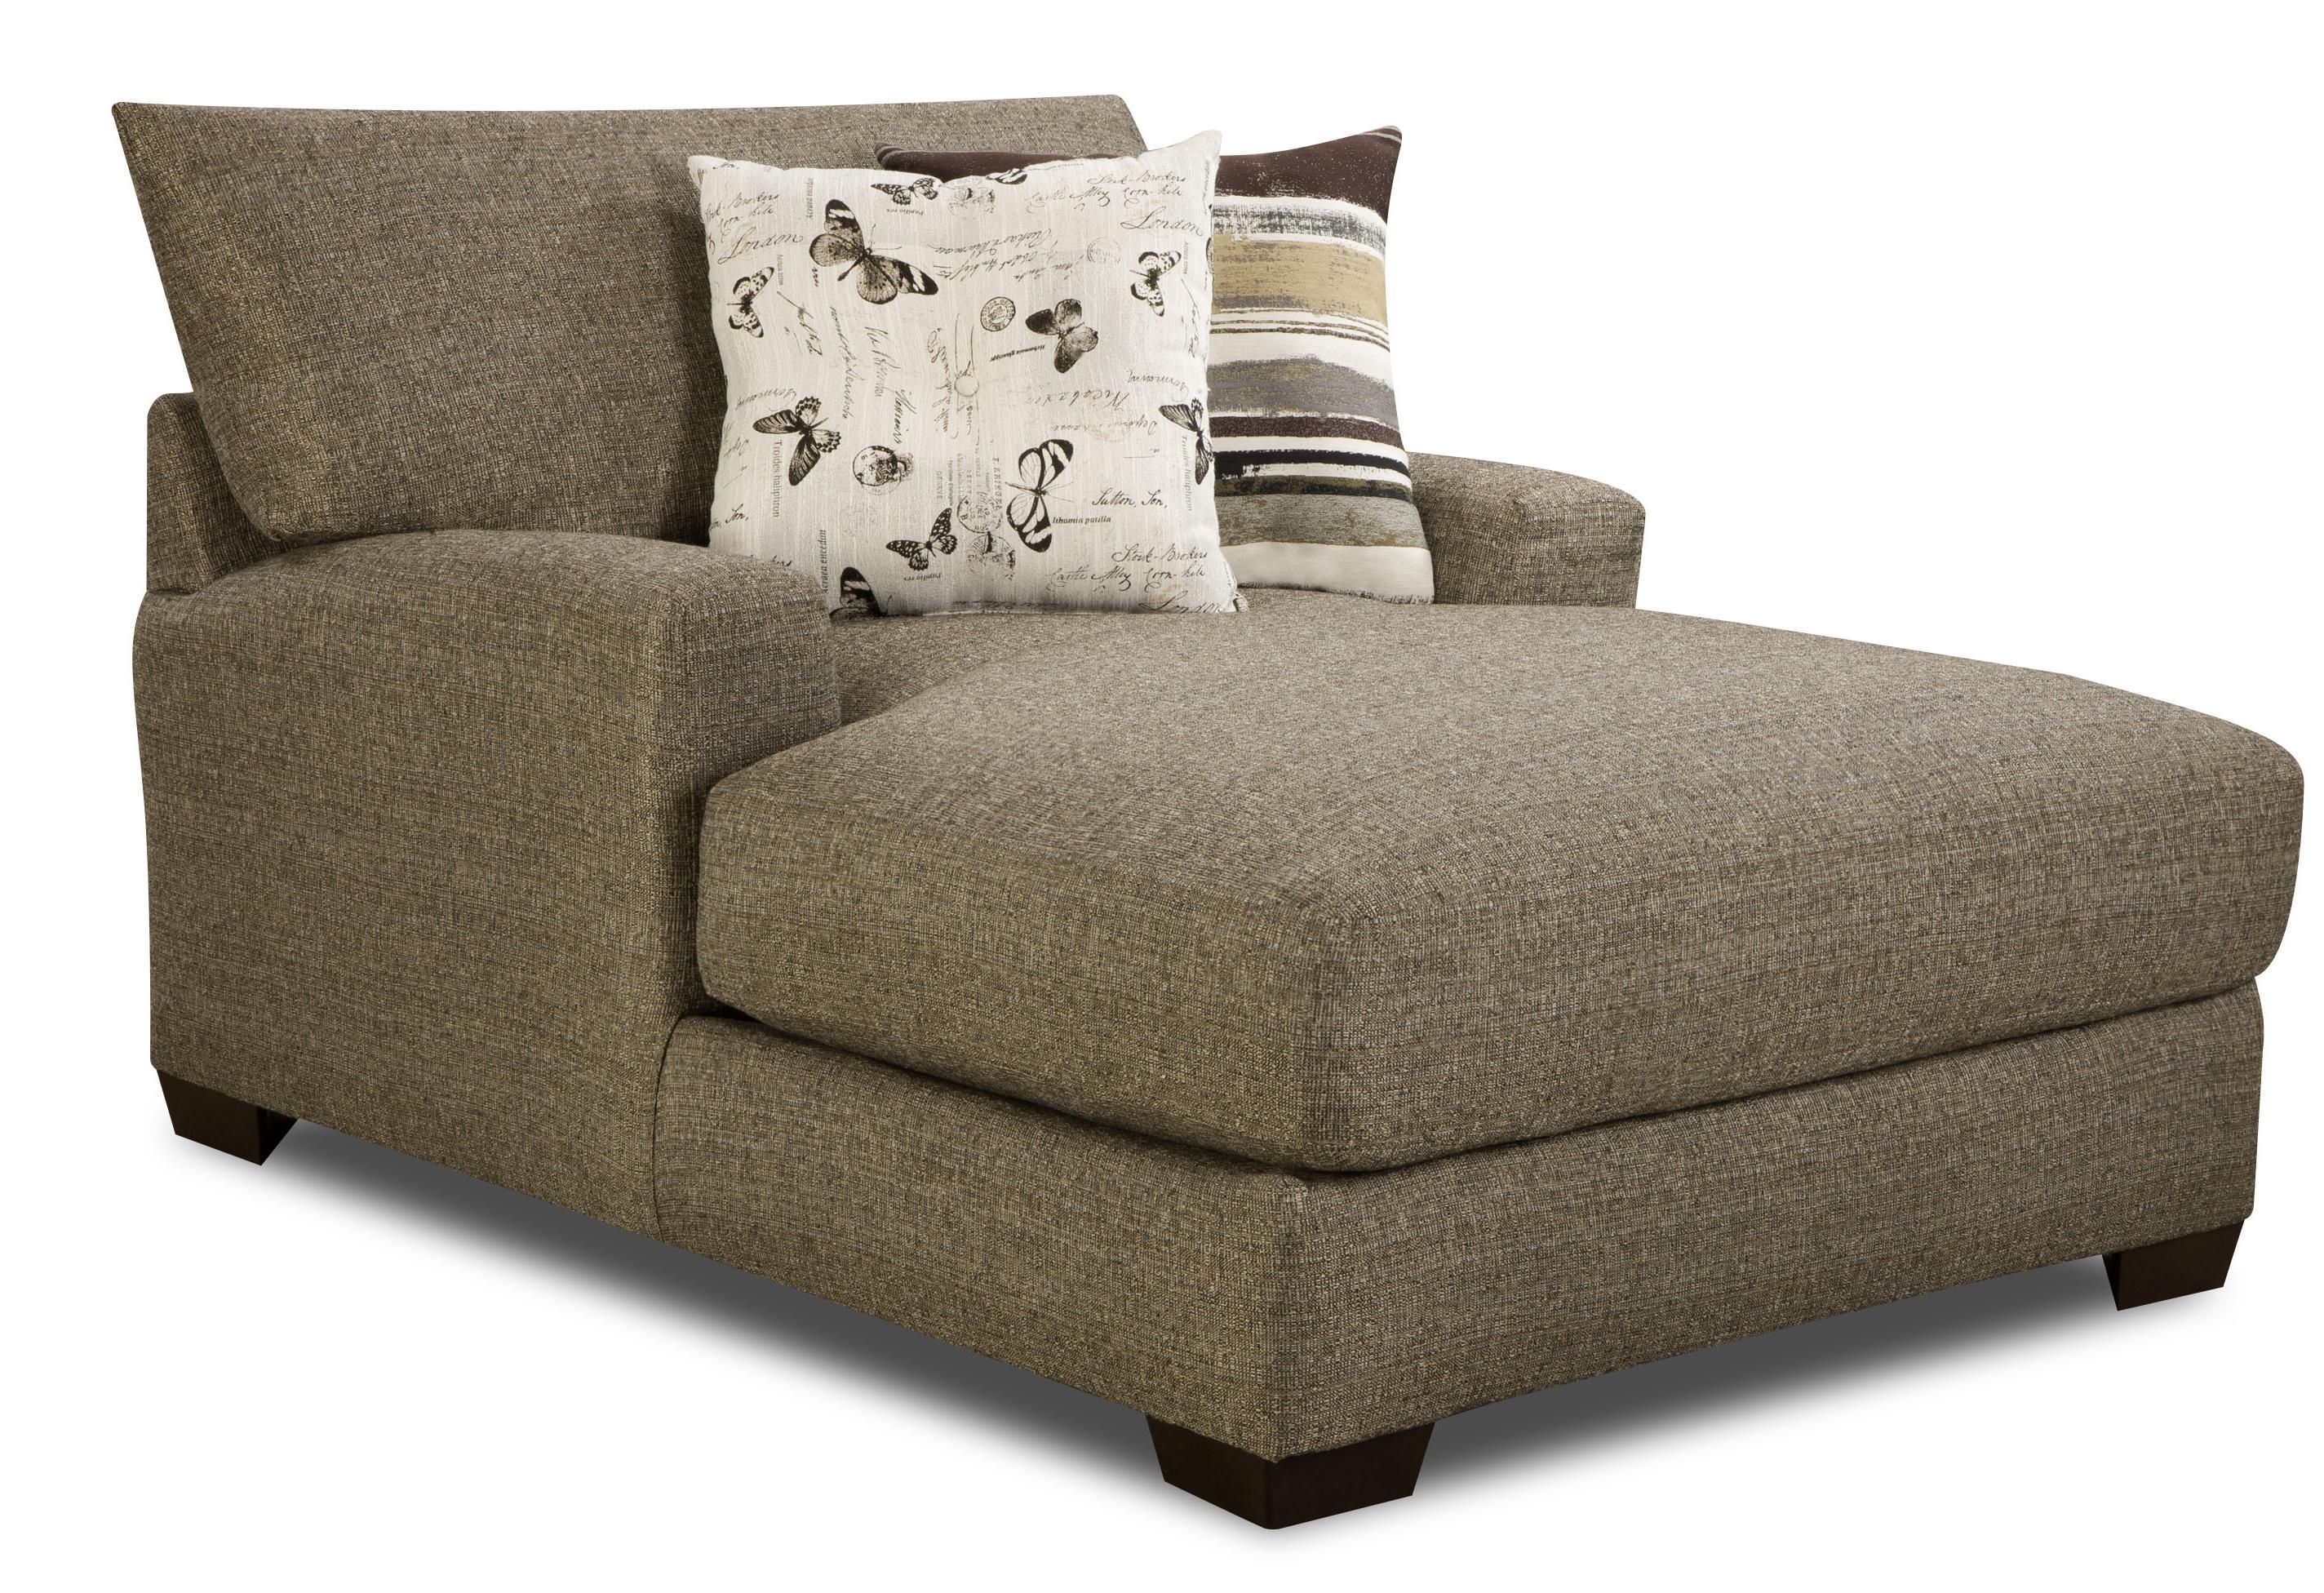 Furniture Microfiber Chaise Lounge For Comfortable Sofa Design Inside Large Sofa Chairs (View 3 of 15)